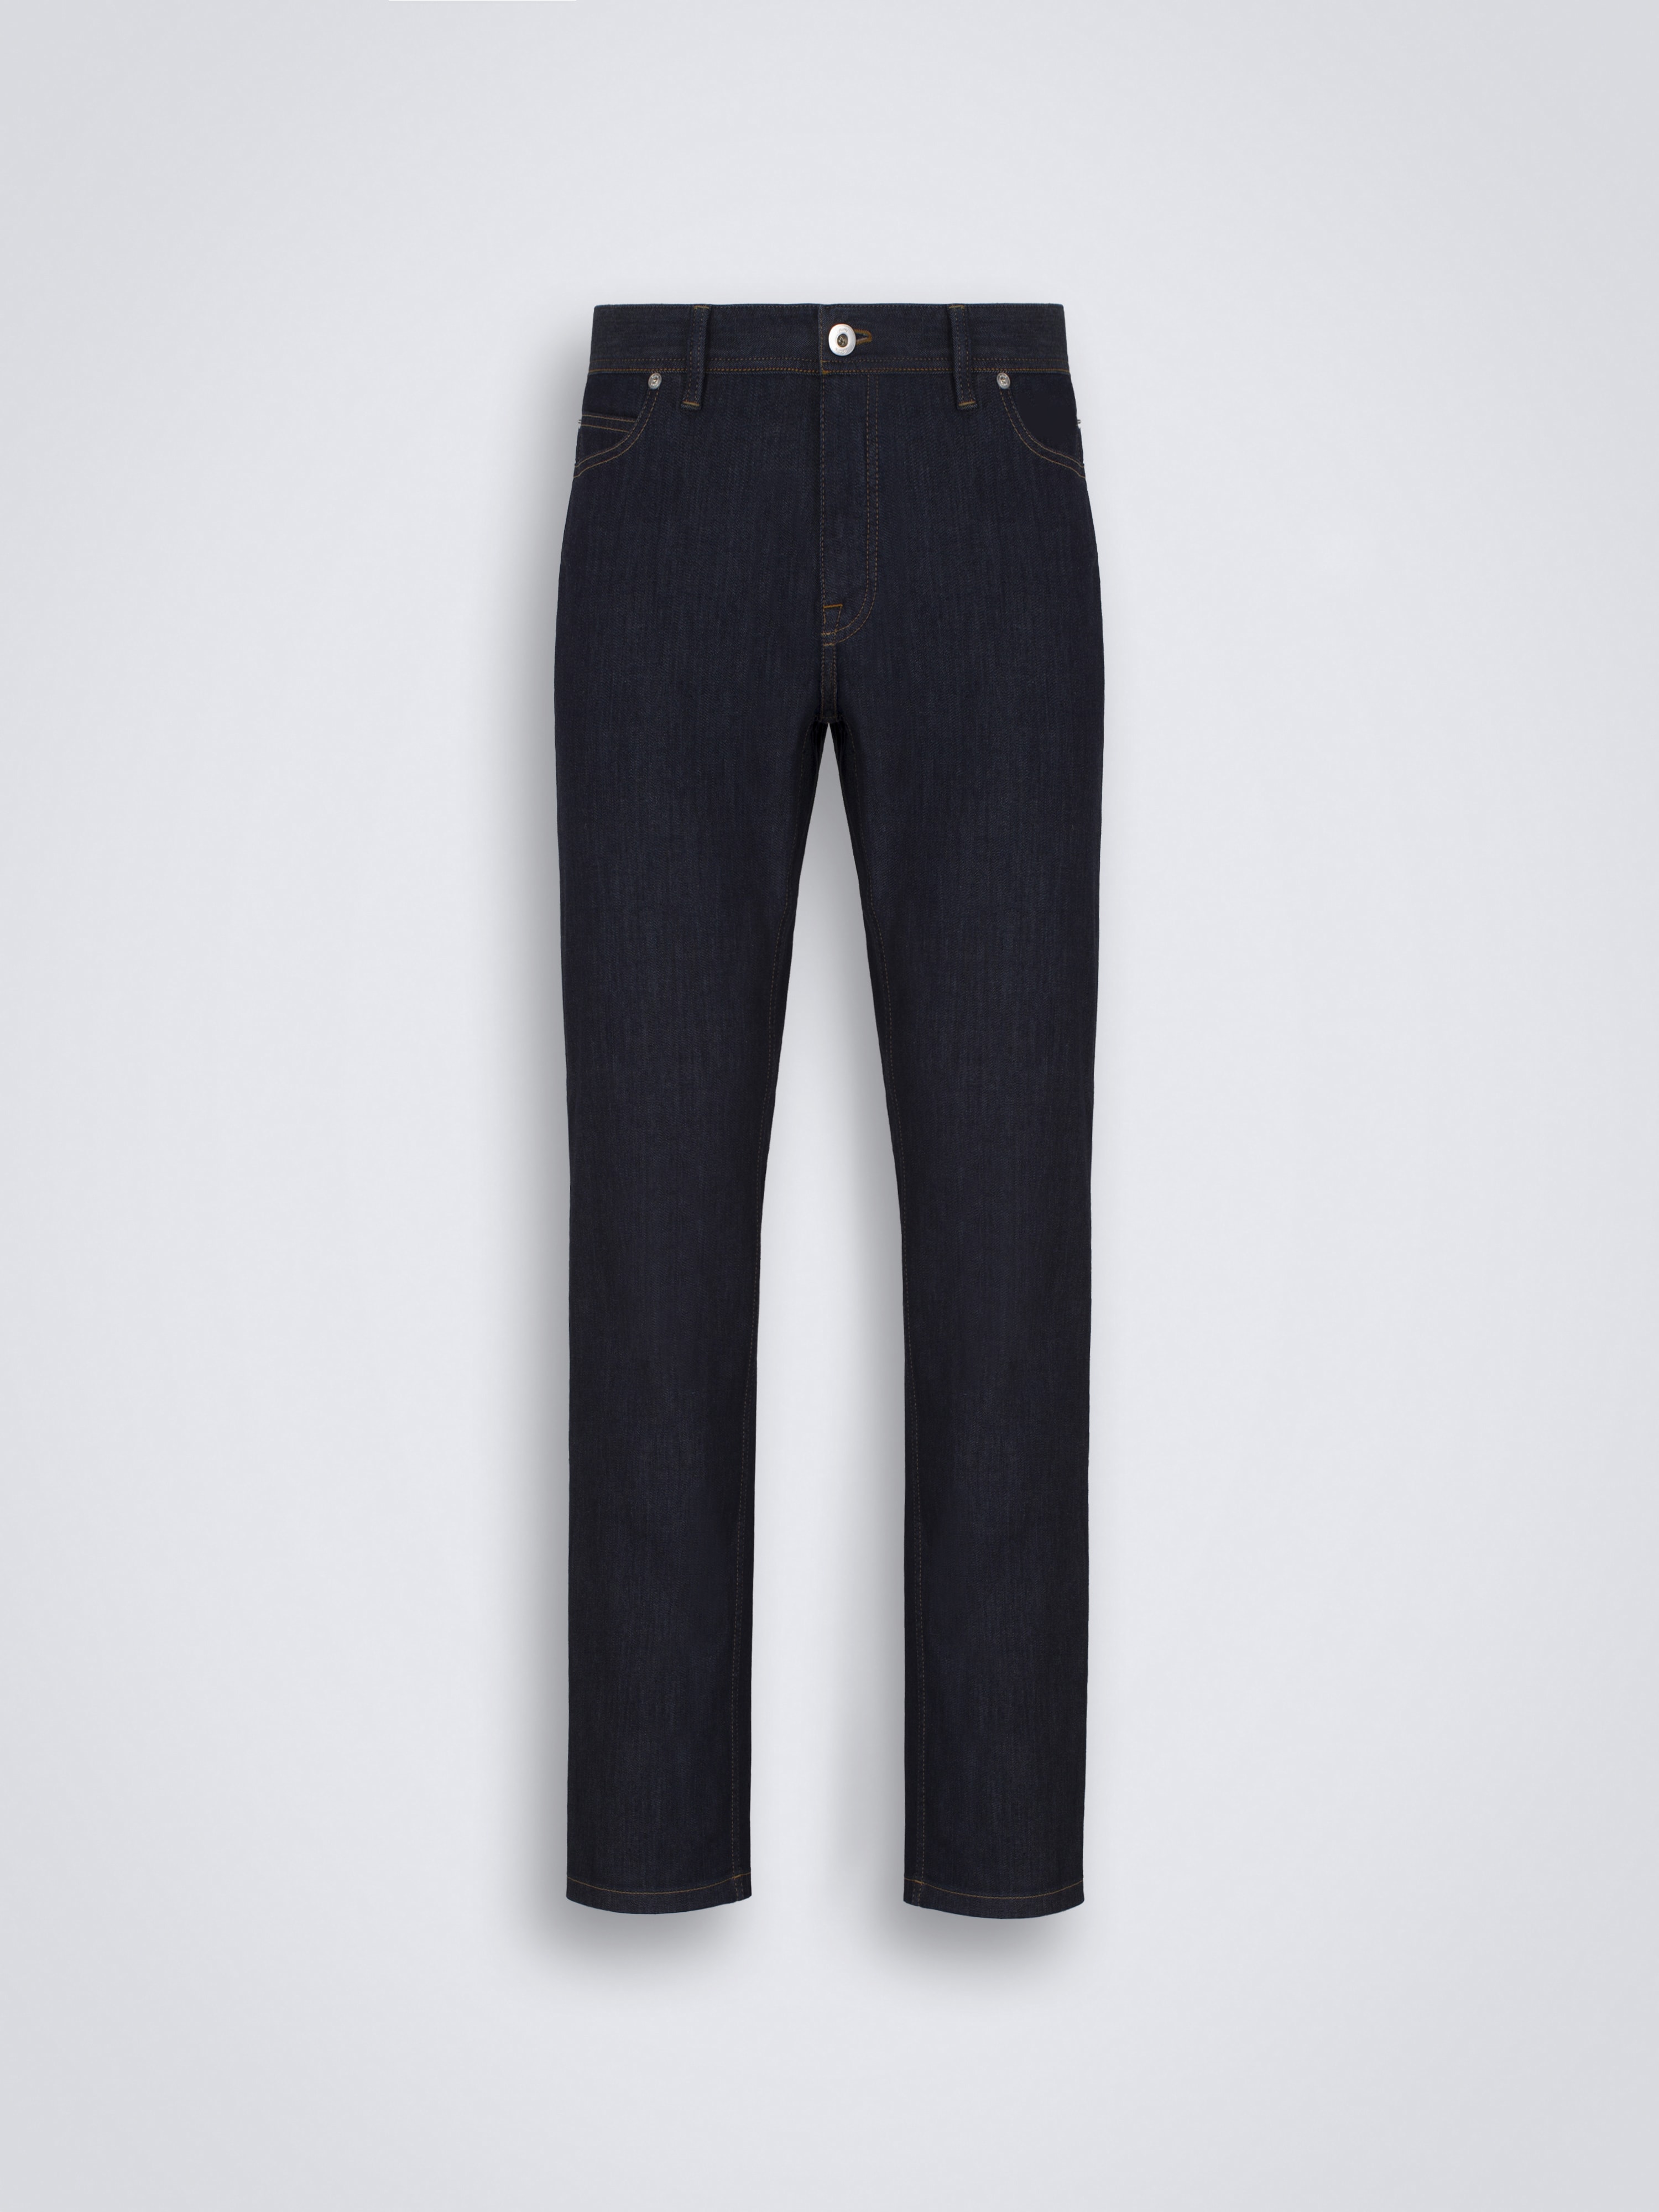 Details about  / J-3799979 New Brioni Midnight Blue Trousers Pants Size US 32